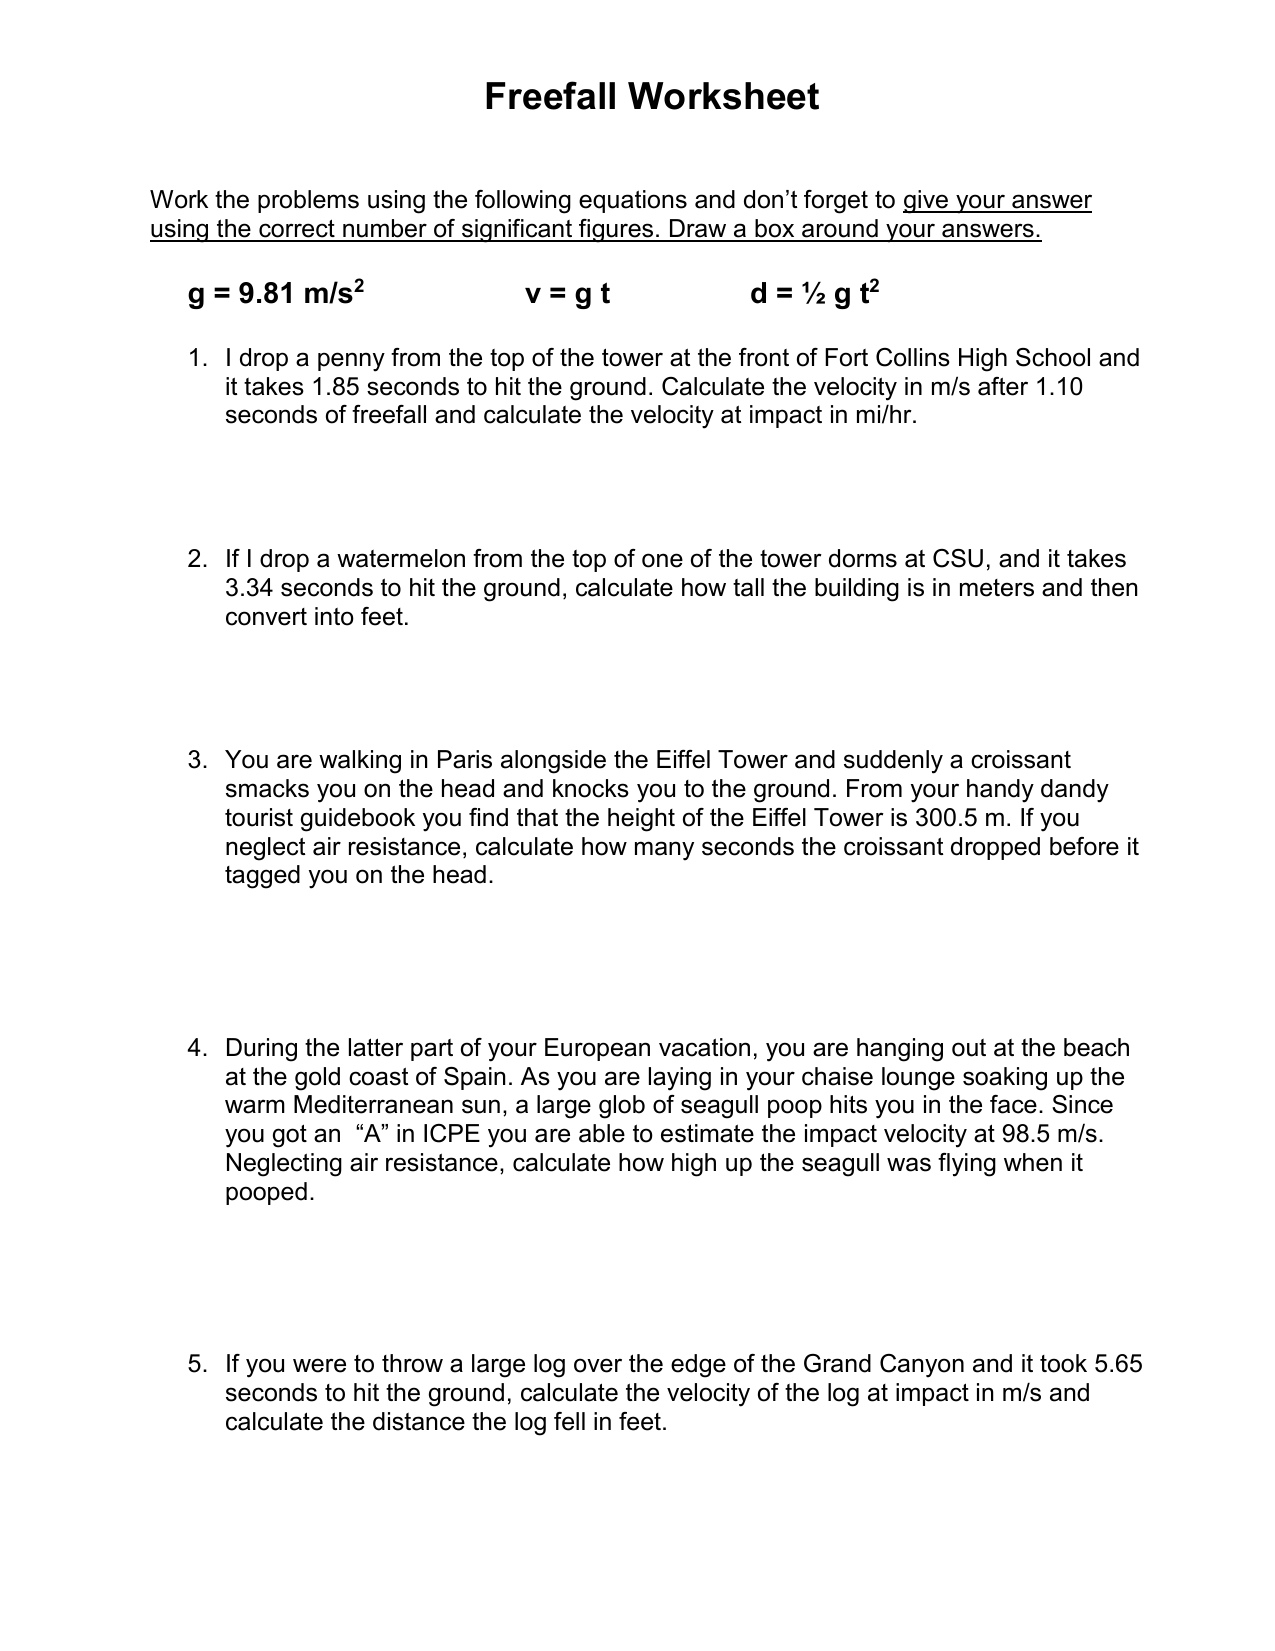 free-fall-worksheets-answers-physics